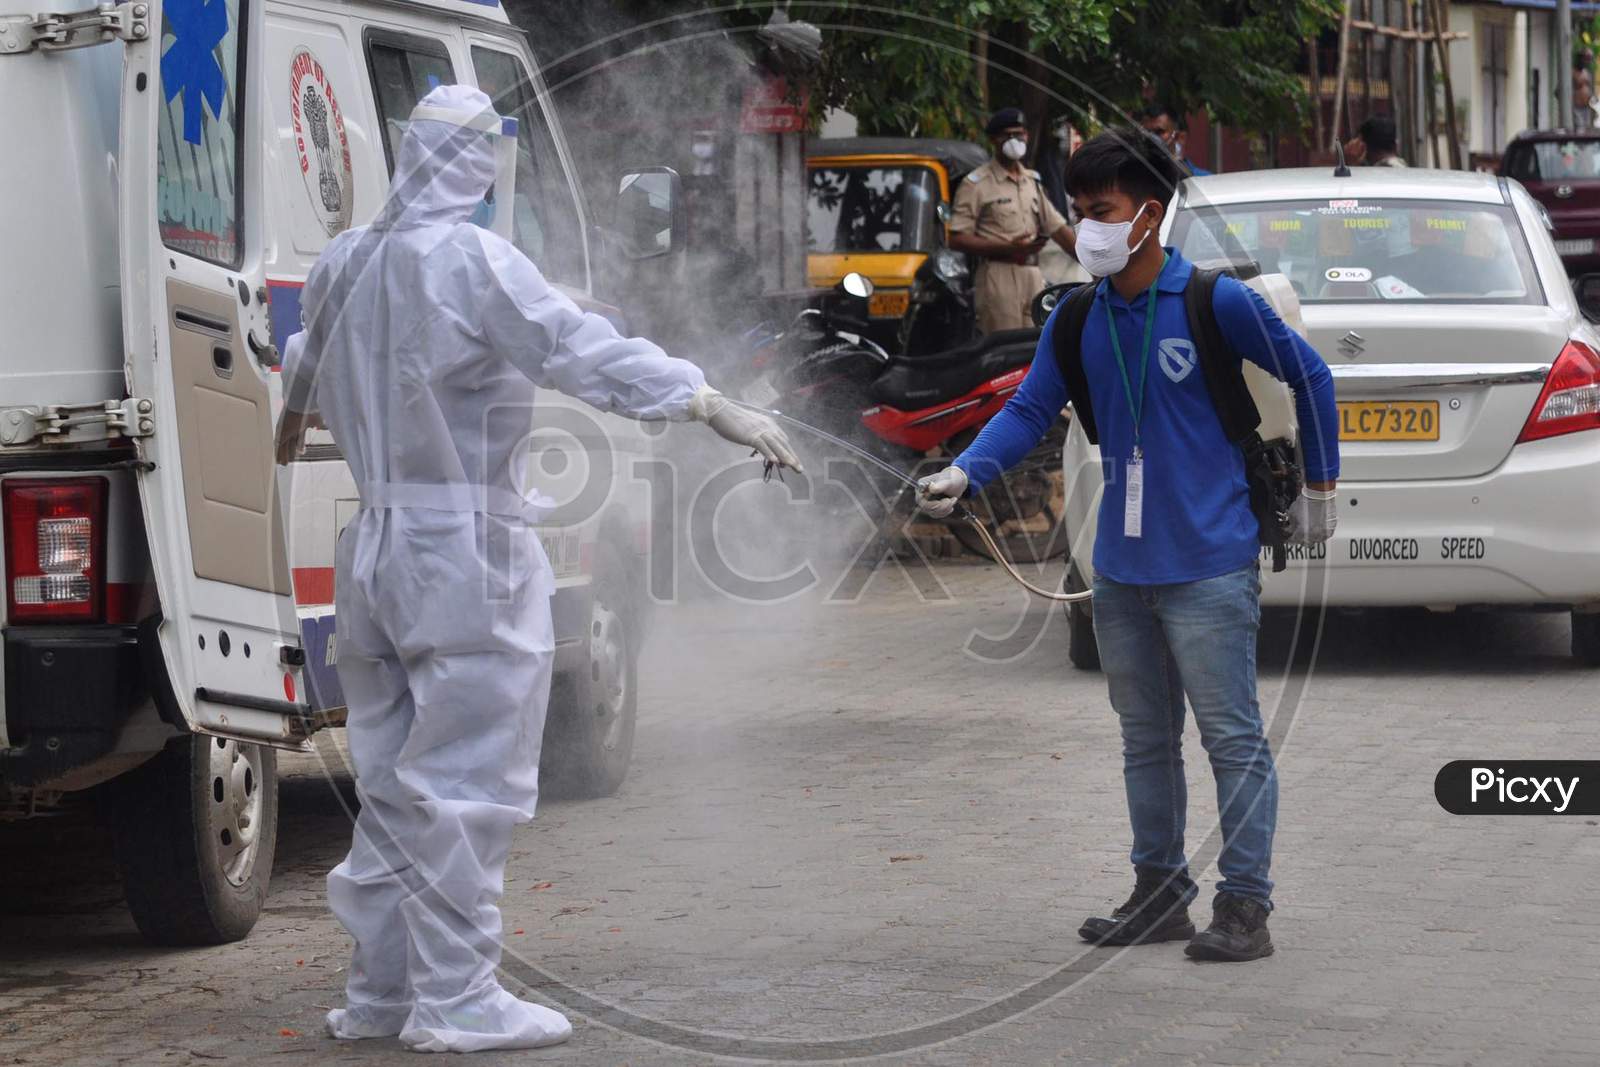 A health worker sprays disinfectant on another health worker outside a Covid-19 test collection center outside a hospital in Guwahati, Assam on July 06, 2020.